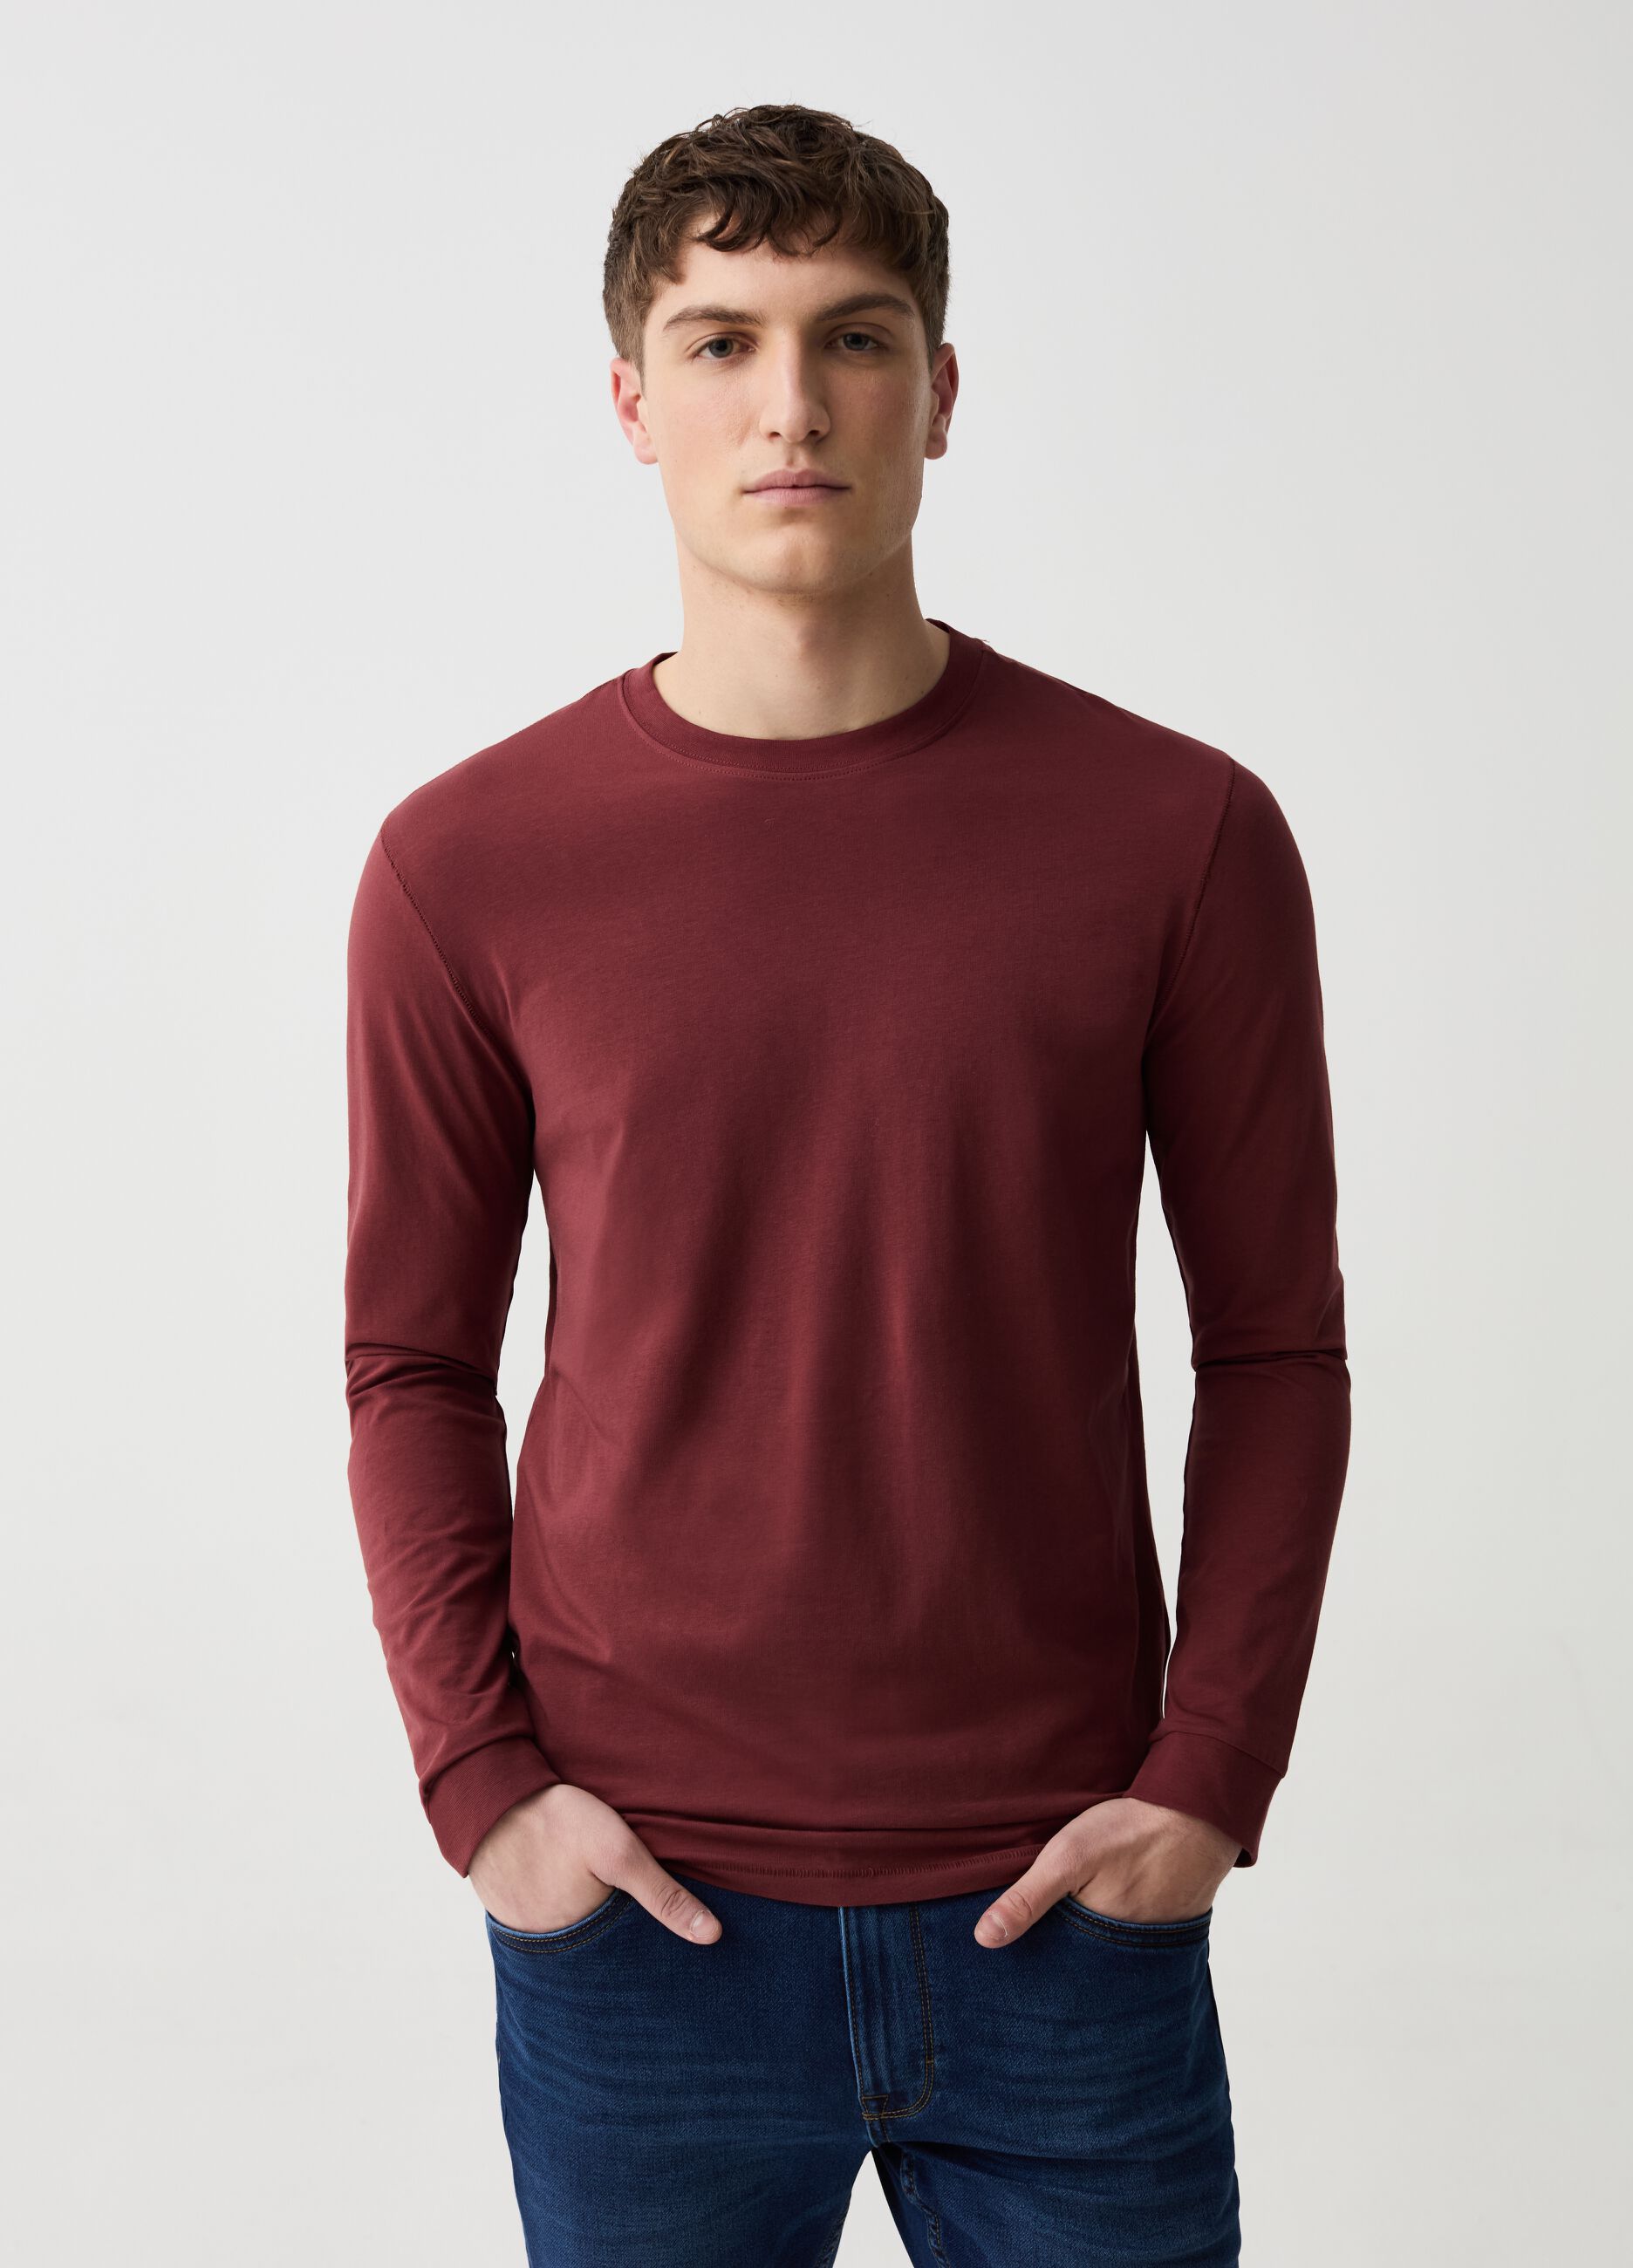 Long-sleeved T-shirt with round neck